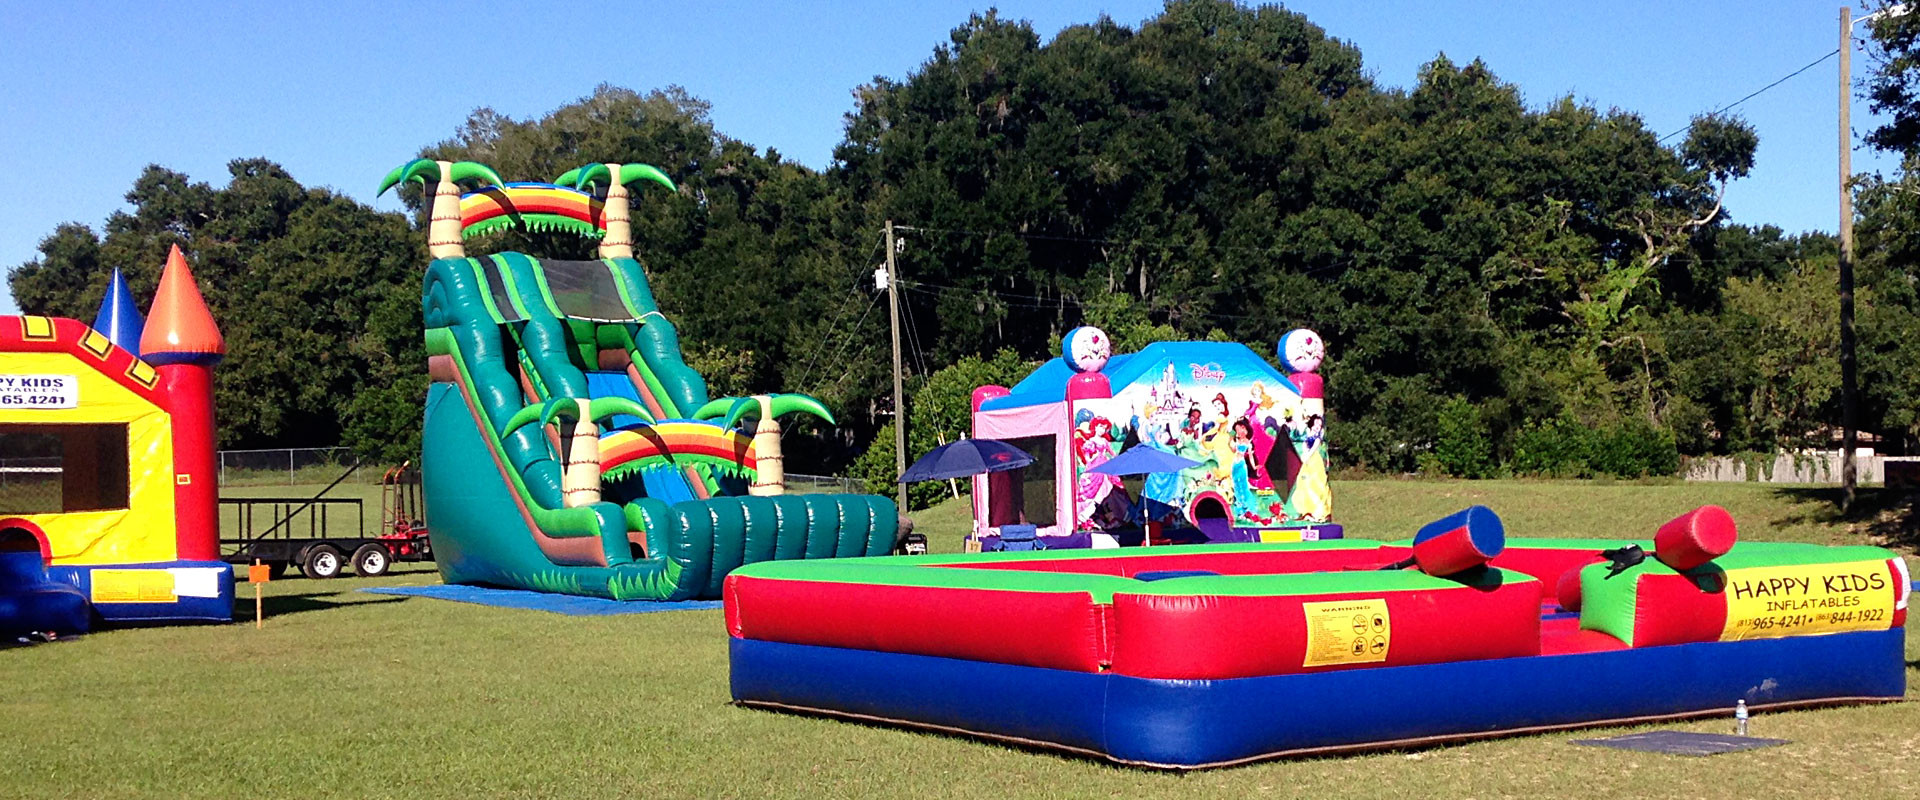 Kids Party Inflatables
 Happy Kids Inflatables